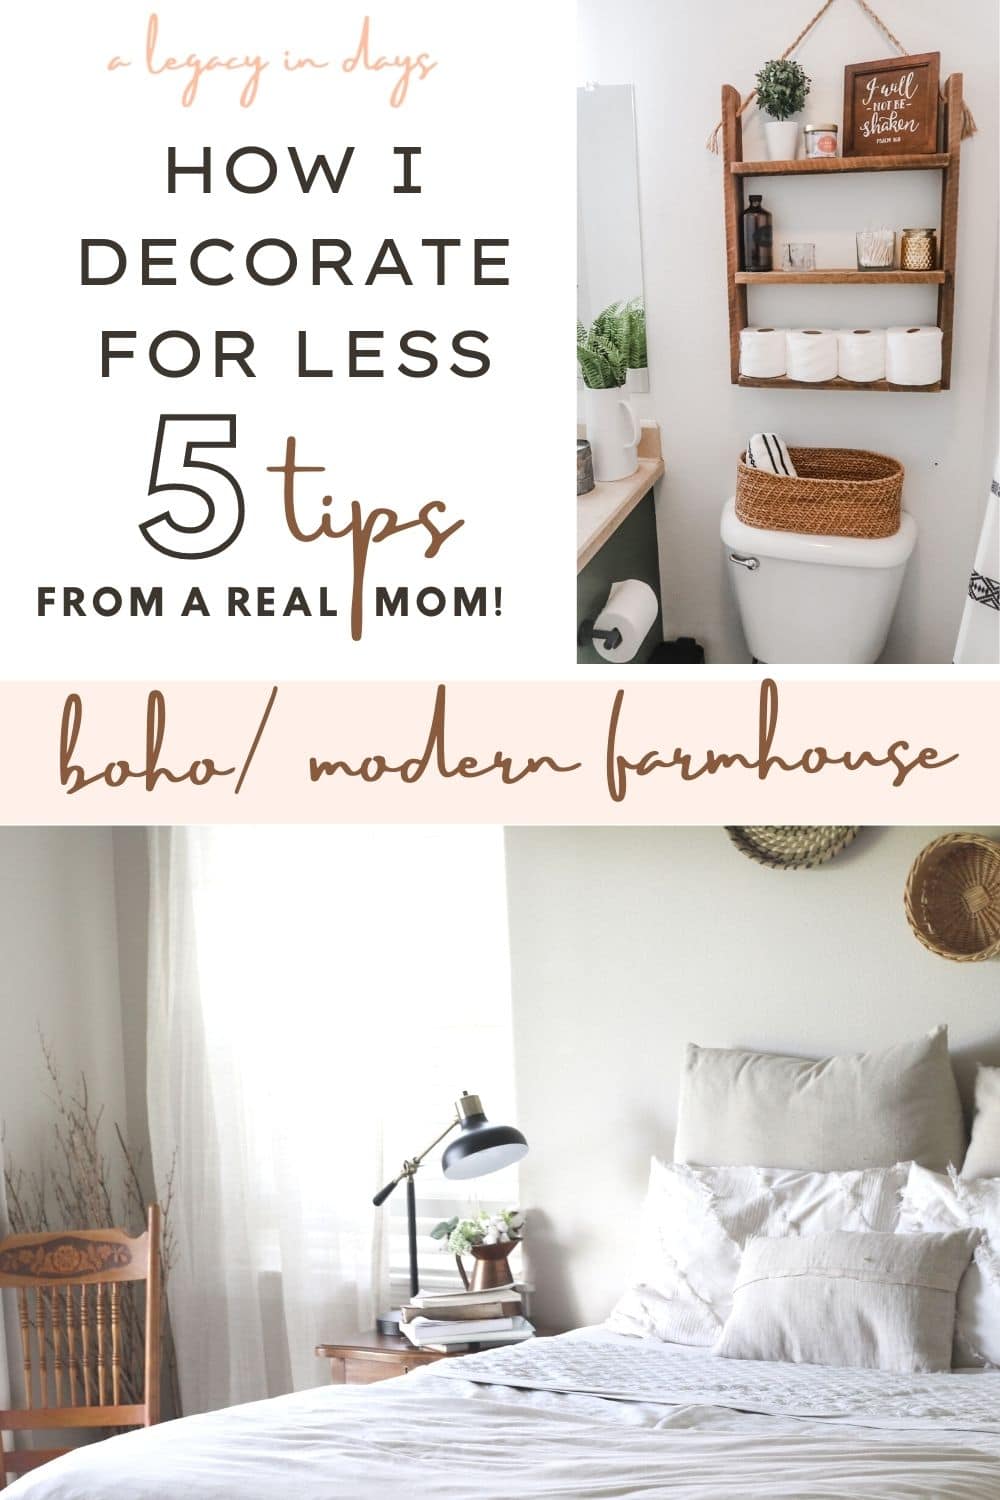 5 ways I decorate for less